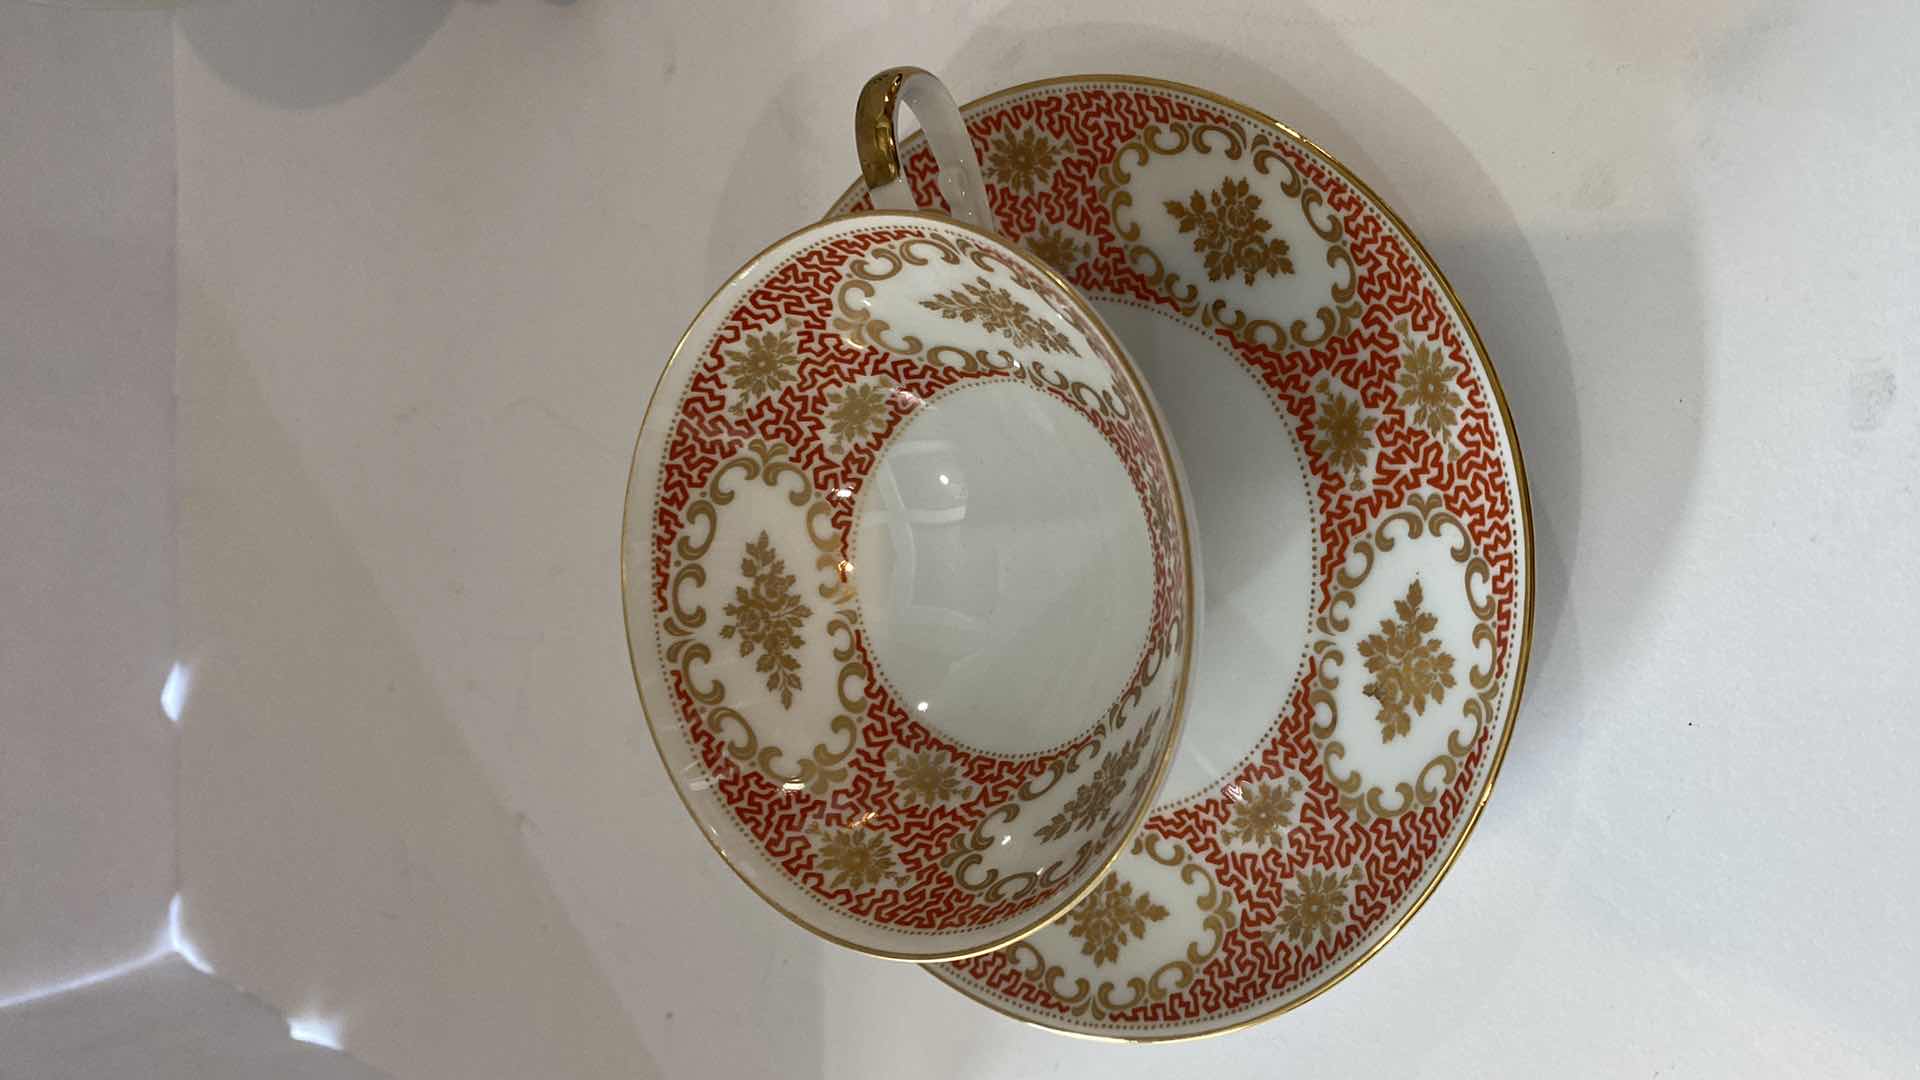 Photo 4 of ALBOTH & KAISER BAVARIA 3 PIECE TEA CUP, SAUCER AND PLATE SET WITH GOLD EDGE